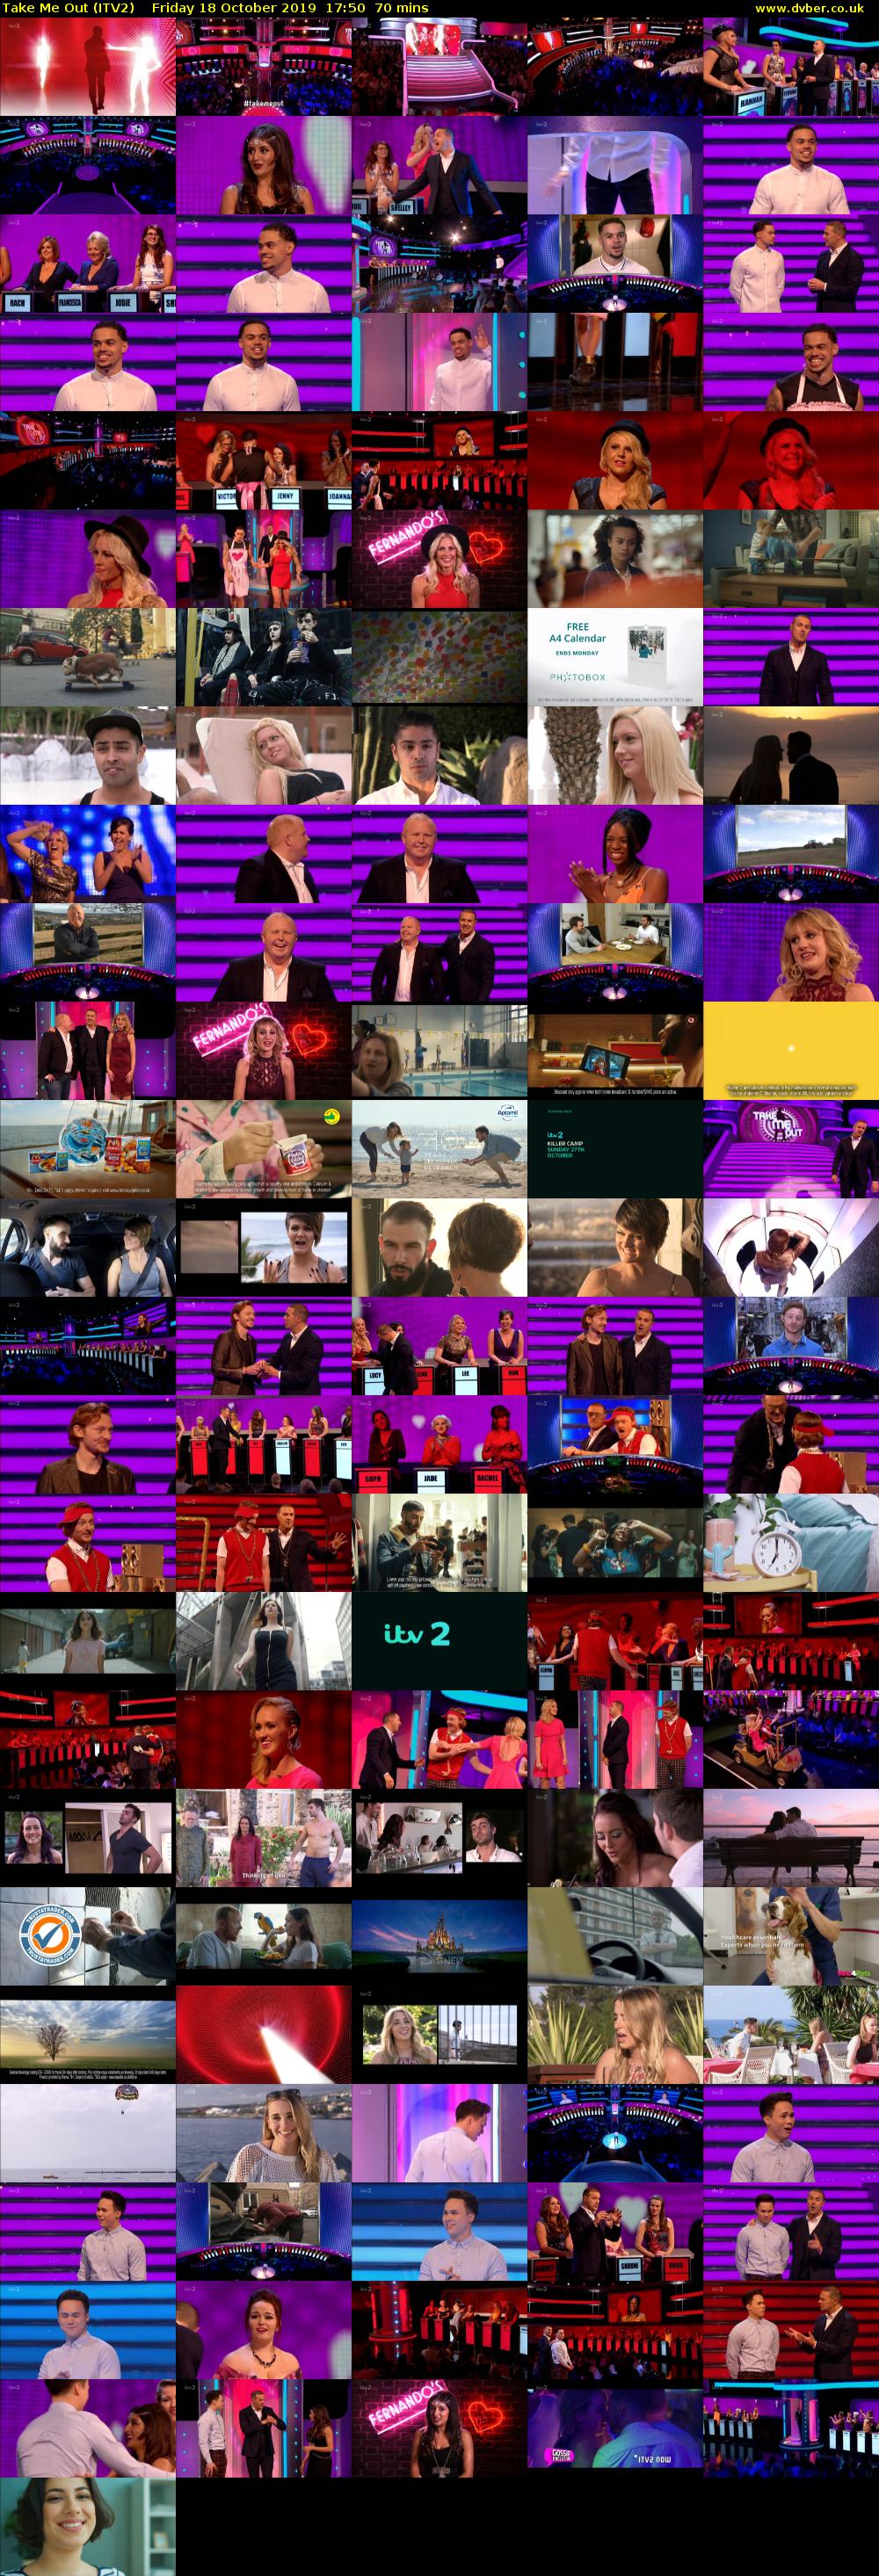 Take Me Out (ITV2) Friday 18 October 2019 17:50 - 19:00